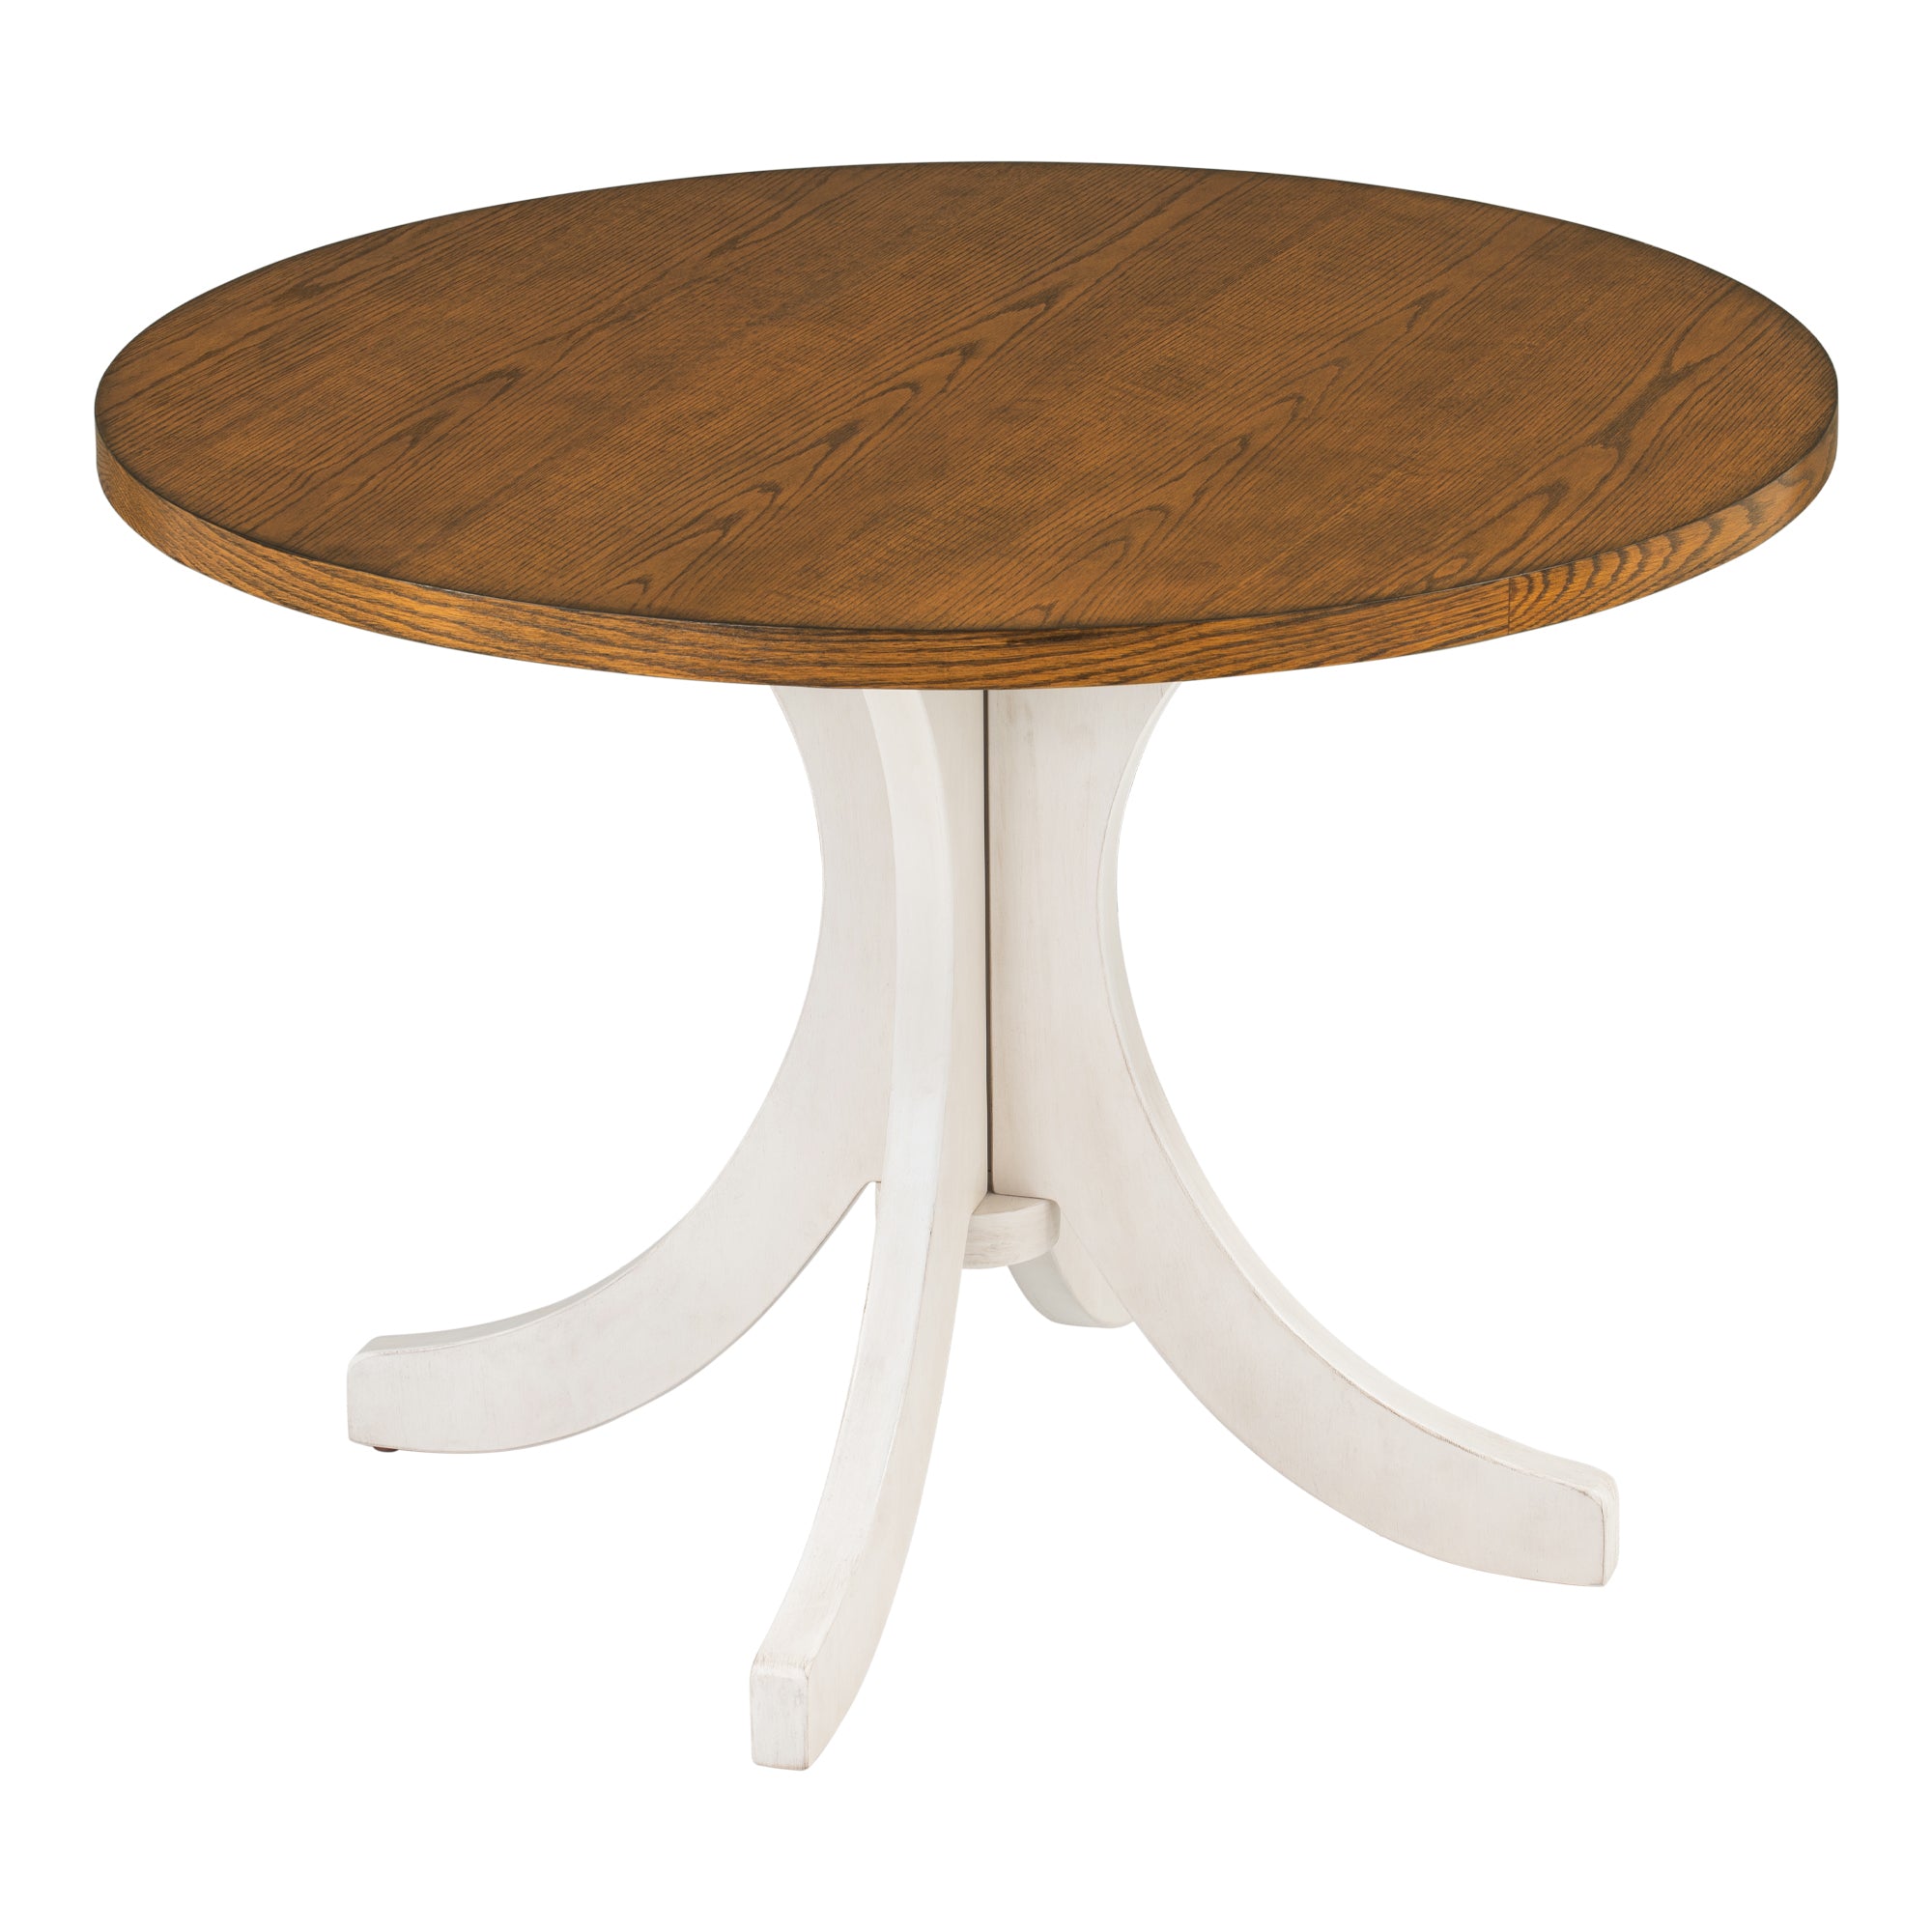 Mid Century Solid Wood Round Dining Table for walnut-dining room-rubberwood-round-kitchen &